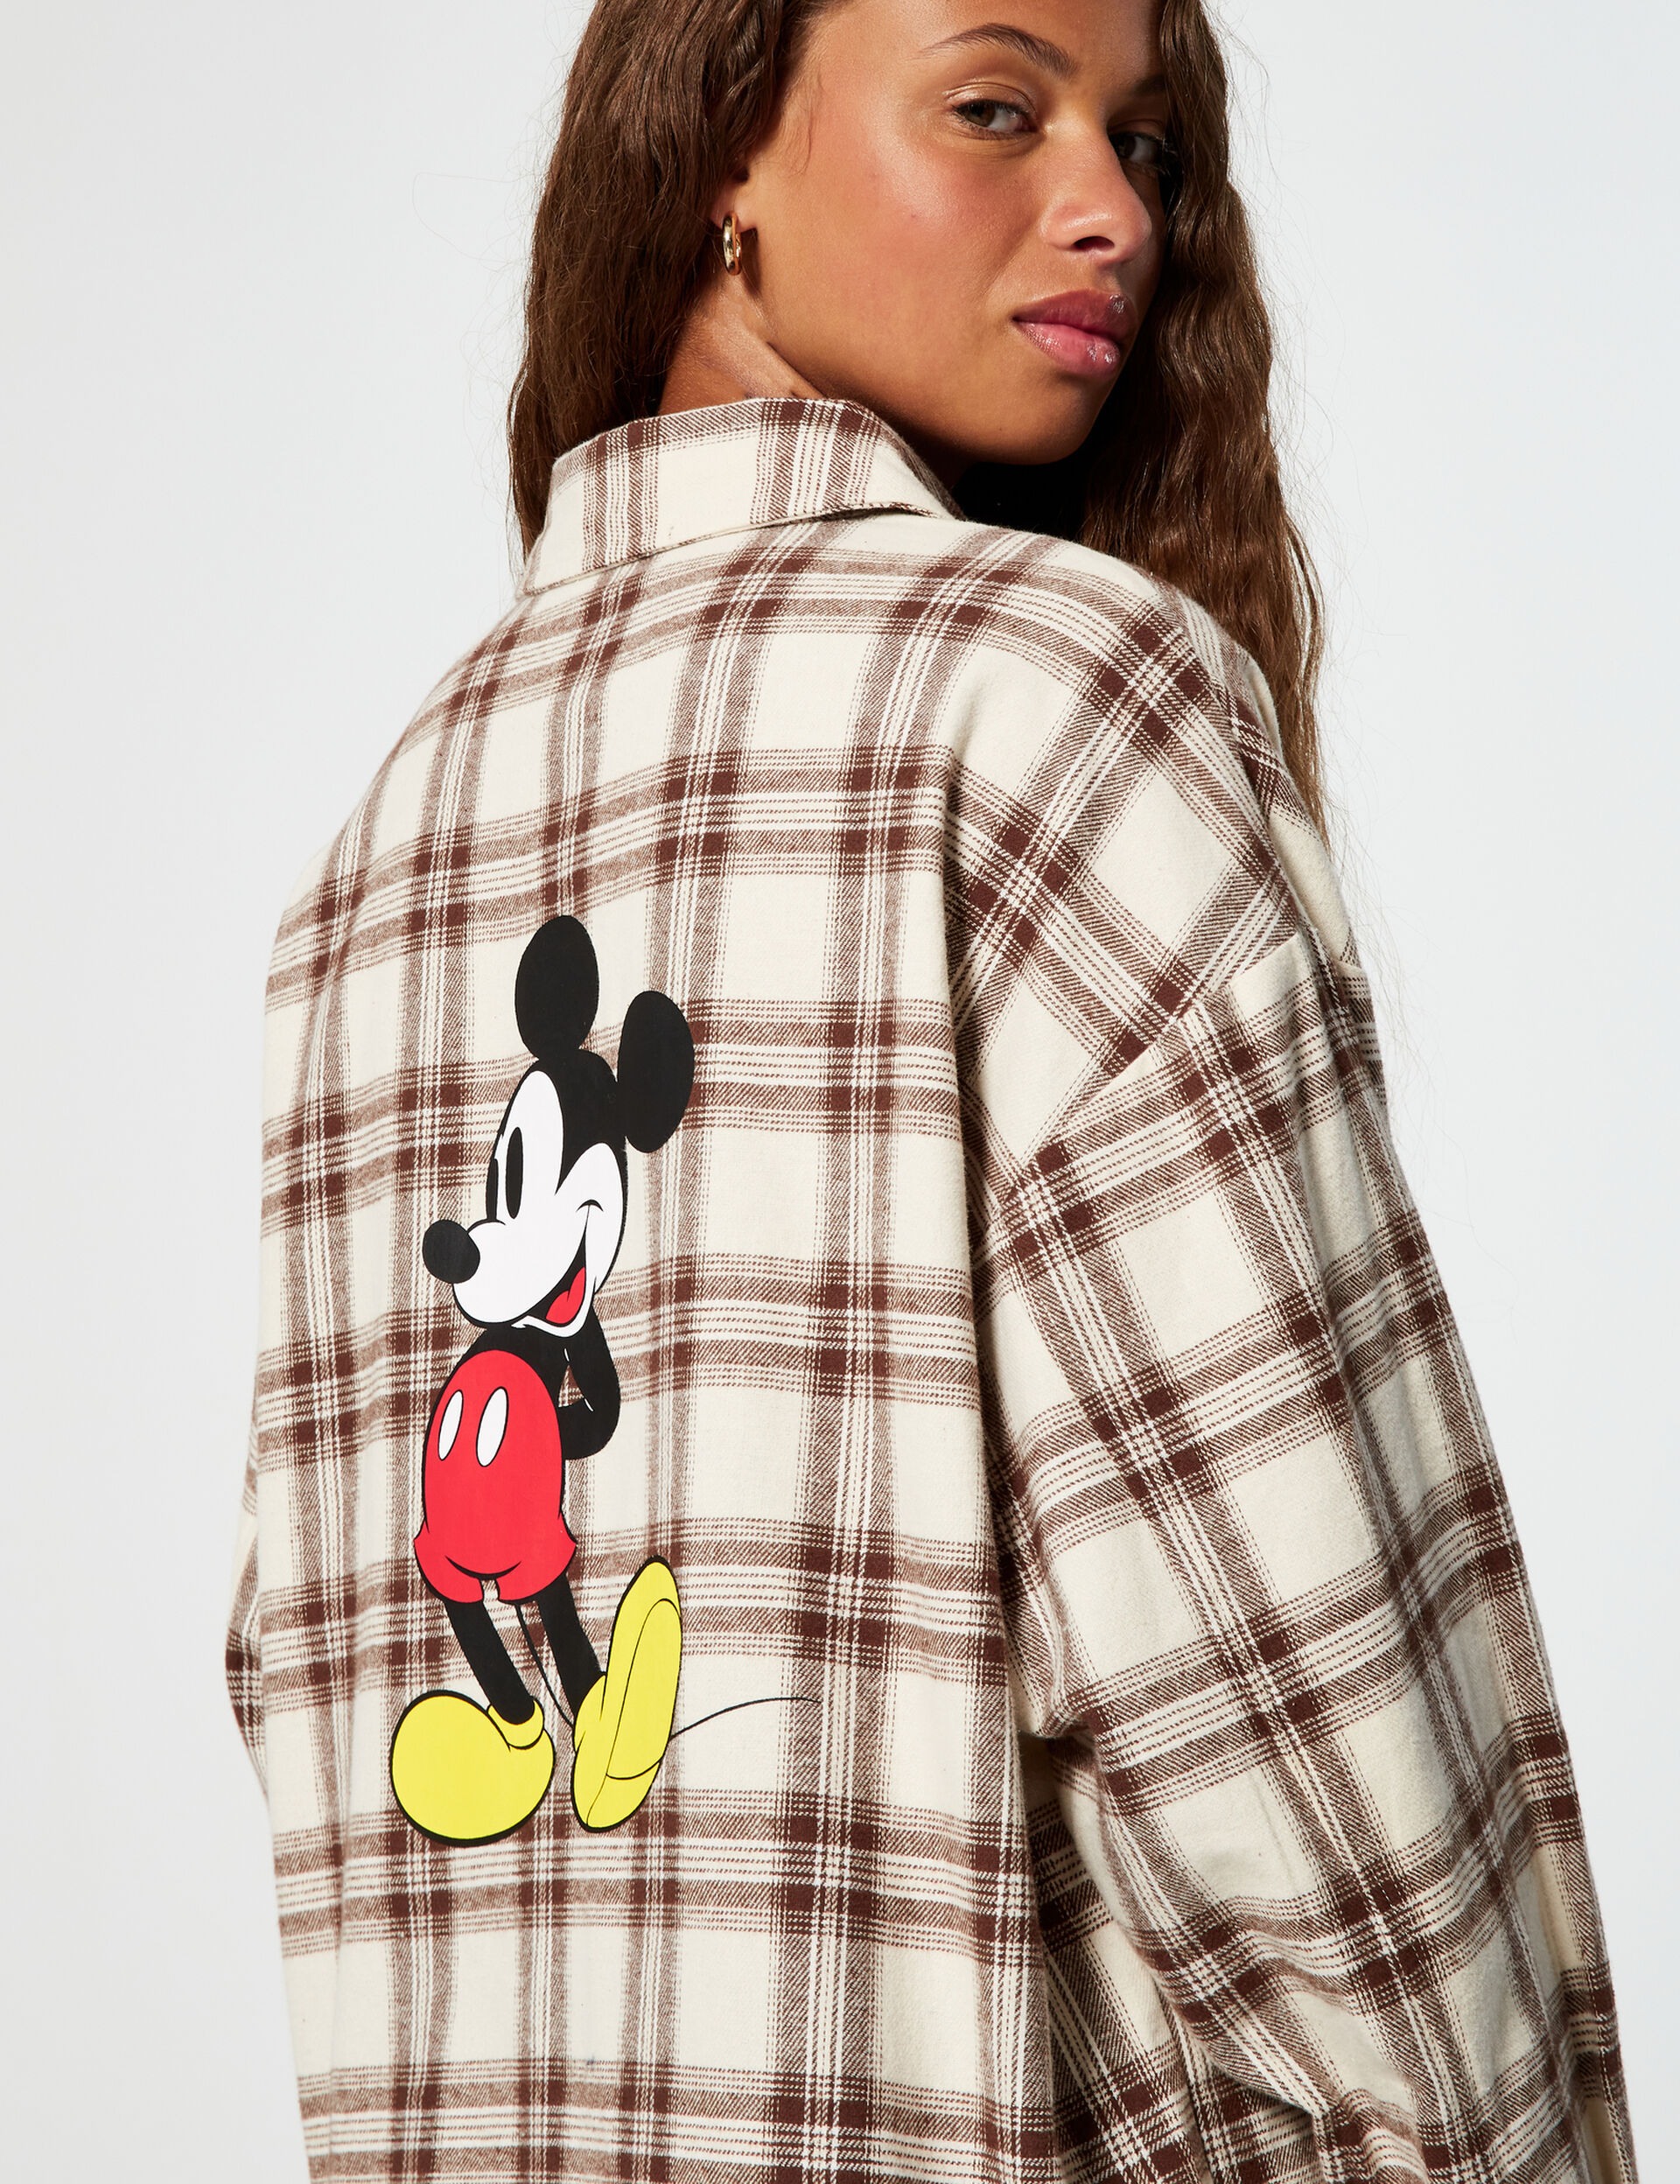 Mickey Mouse checked shirt